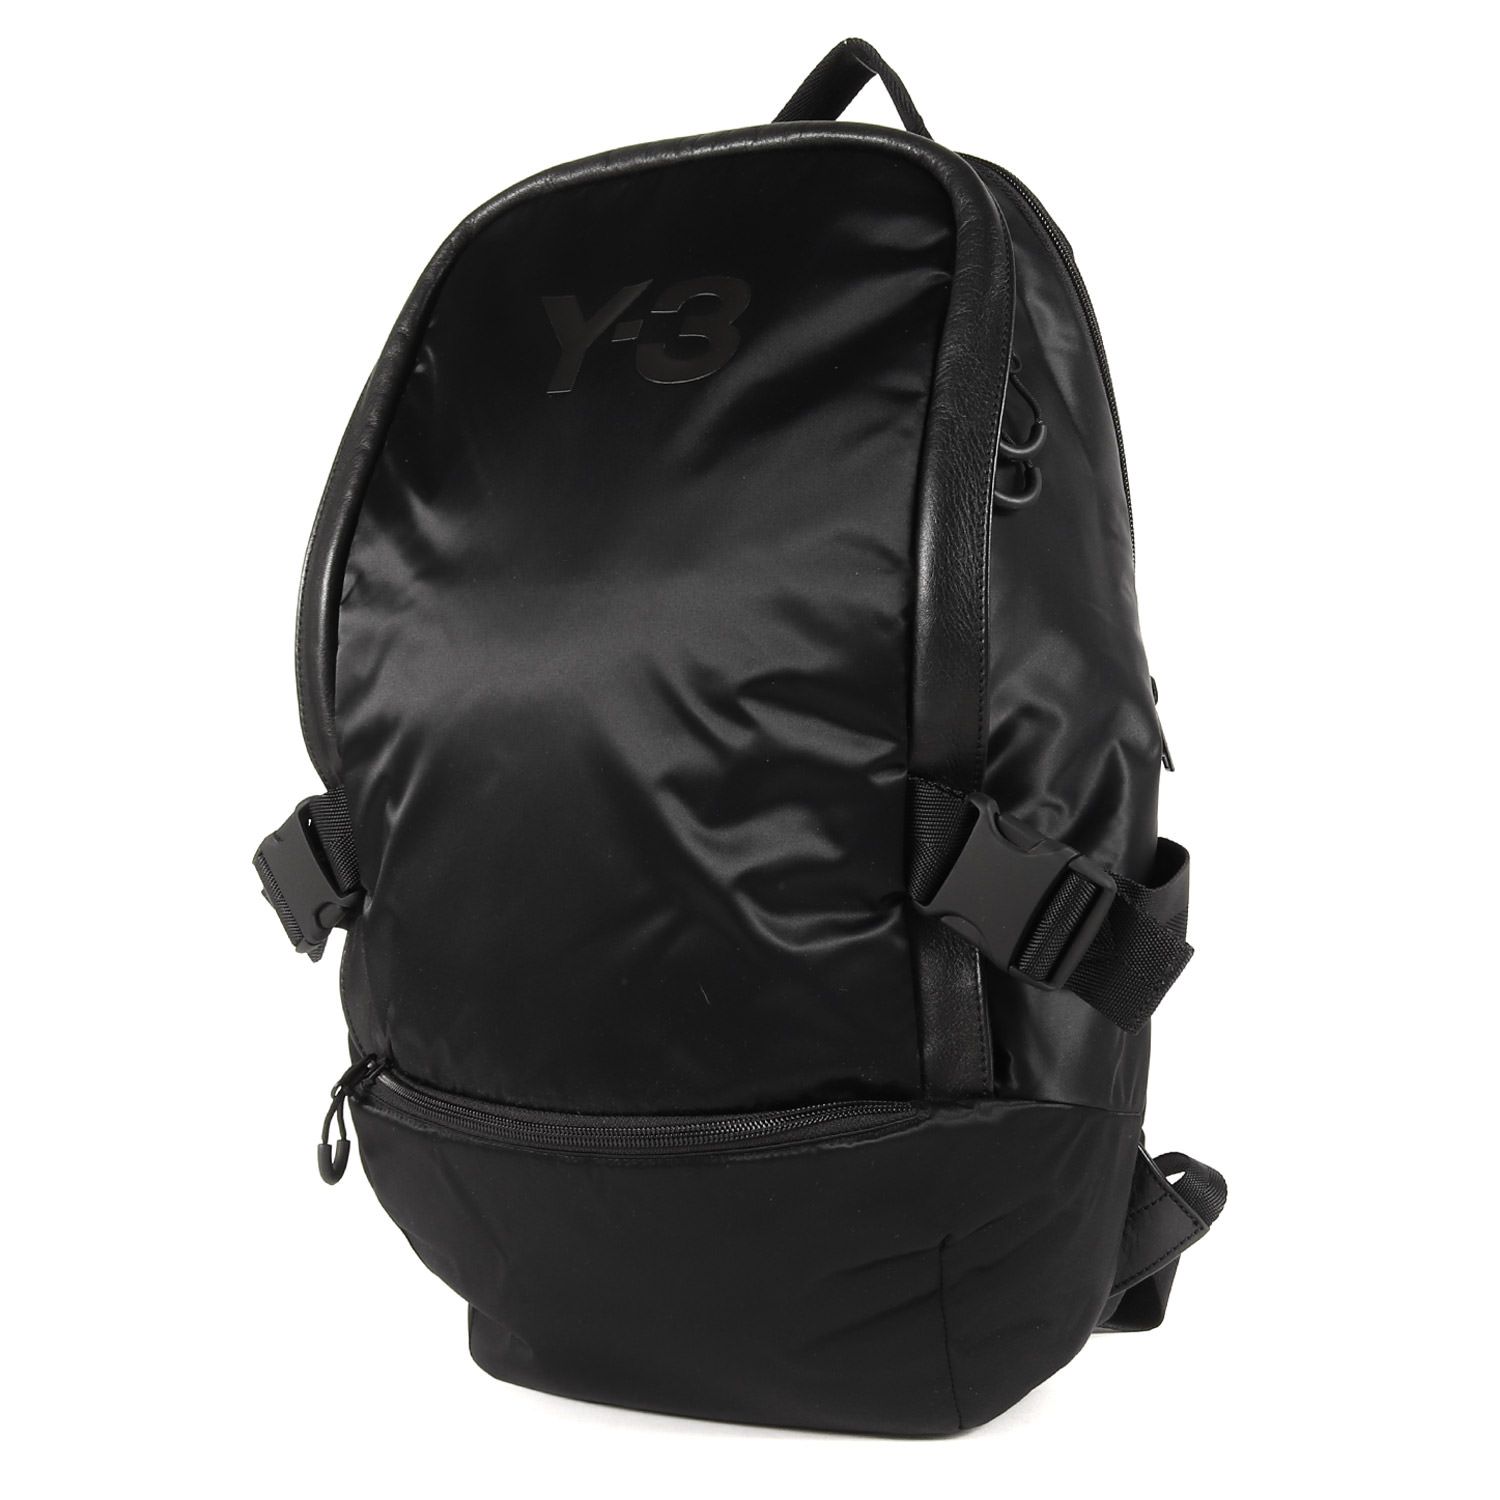 Y-3 ワイスリー バッグ レーサー バックパック Racer Backpack FH9247